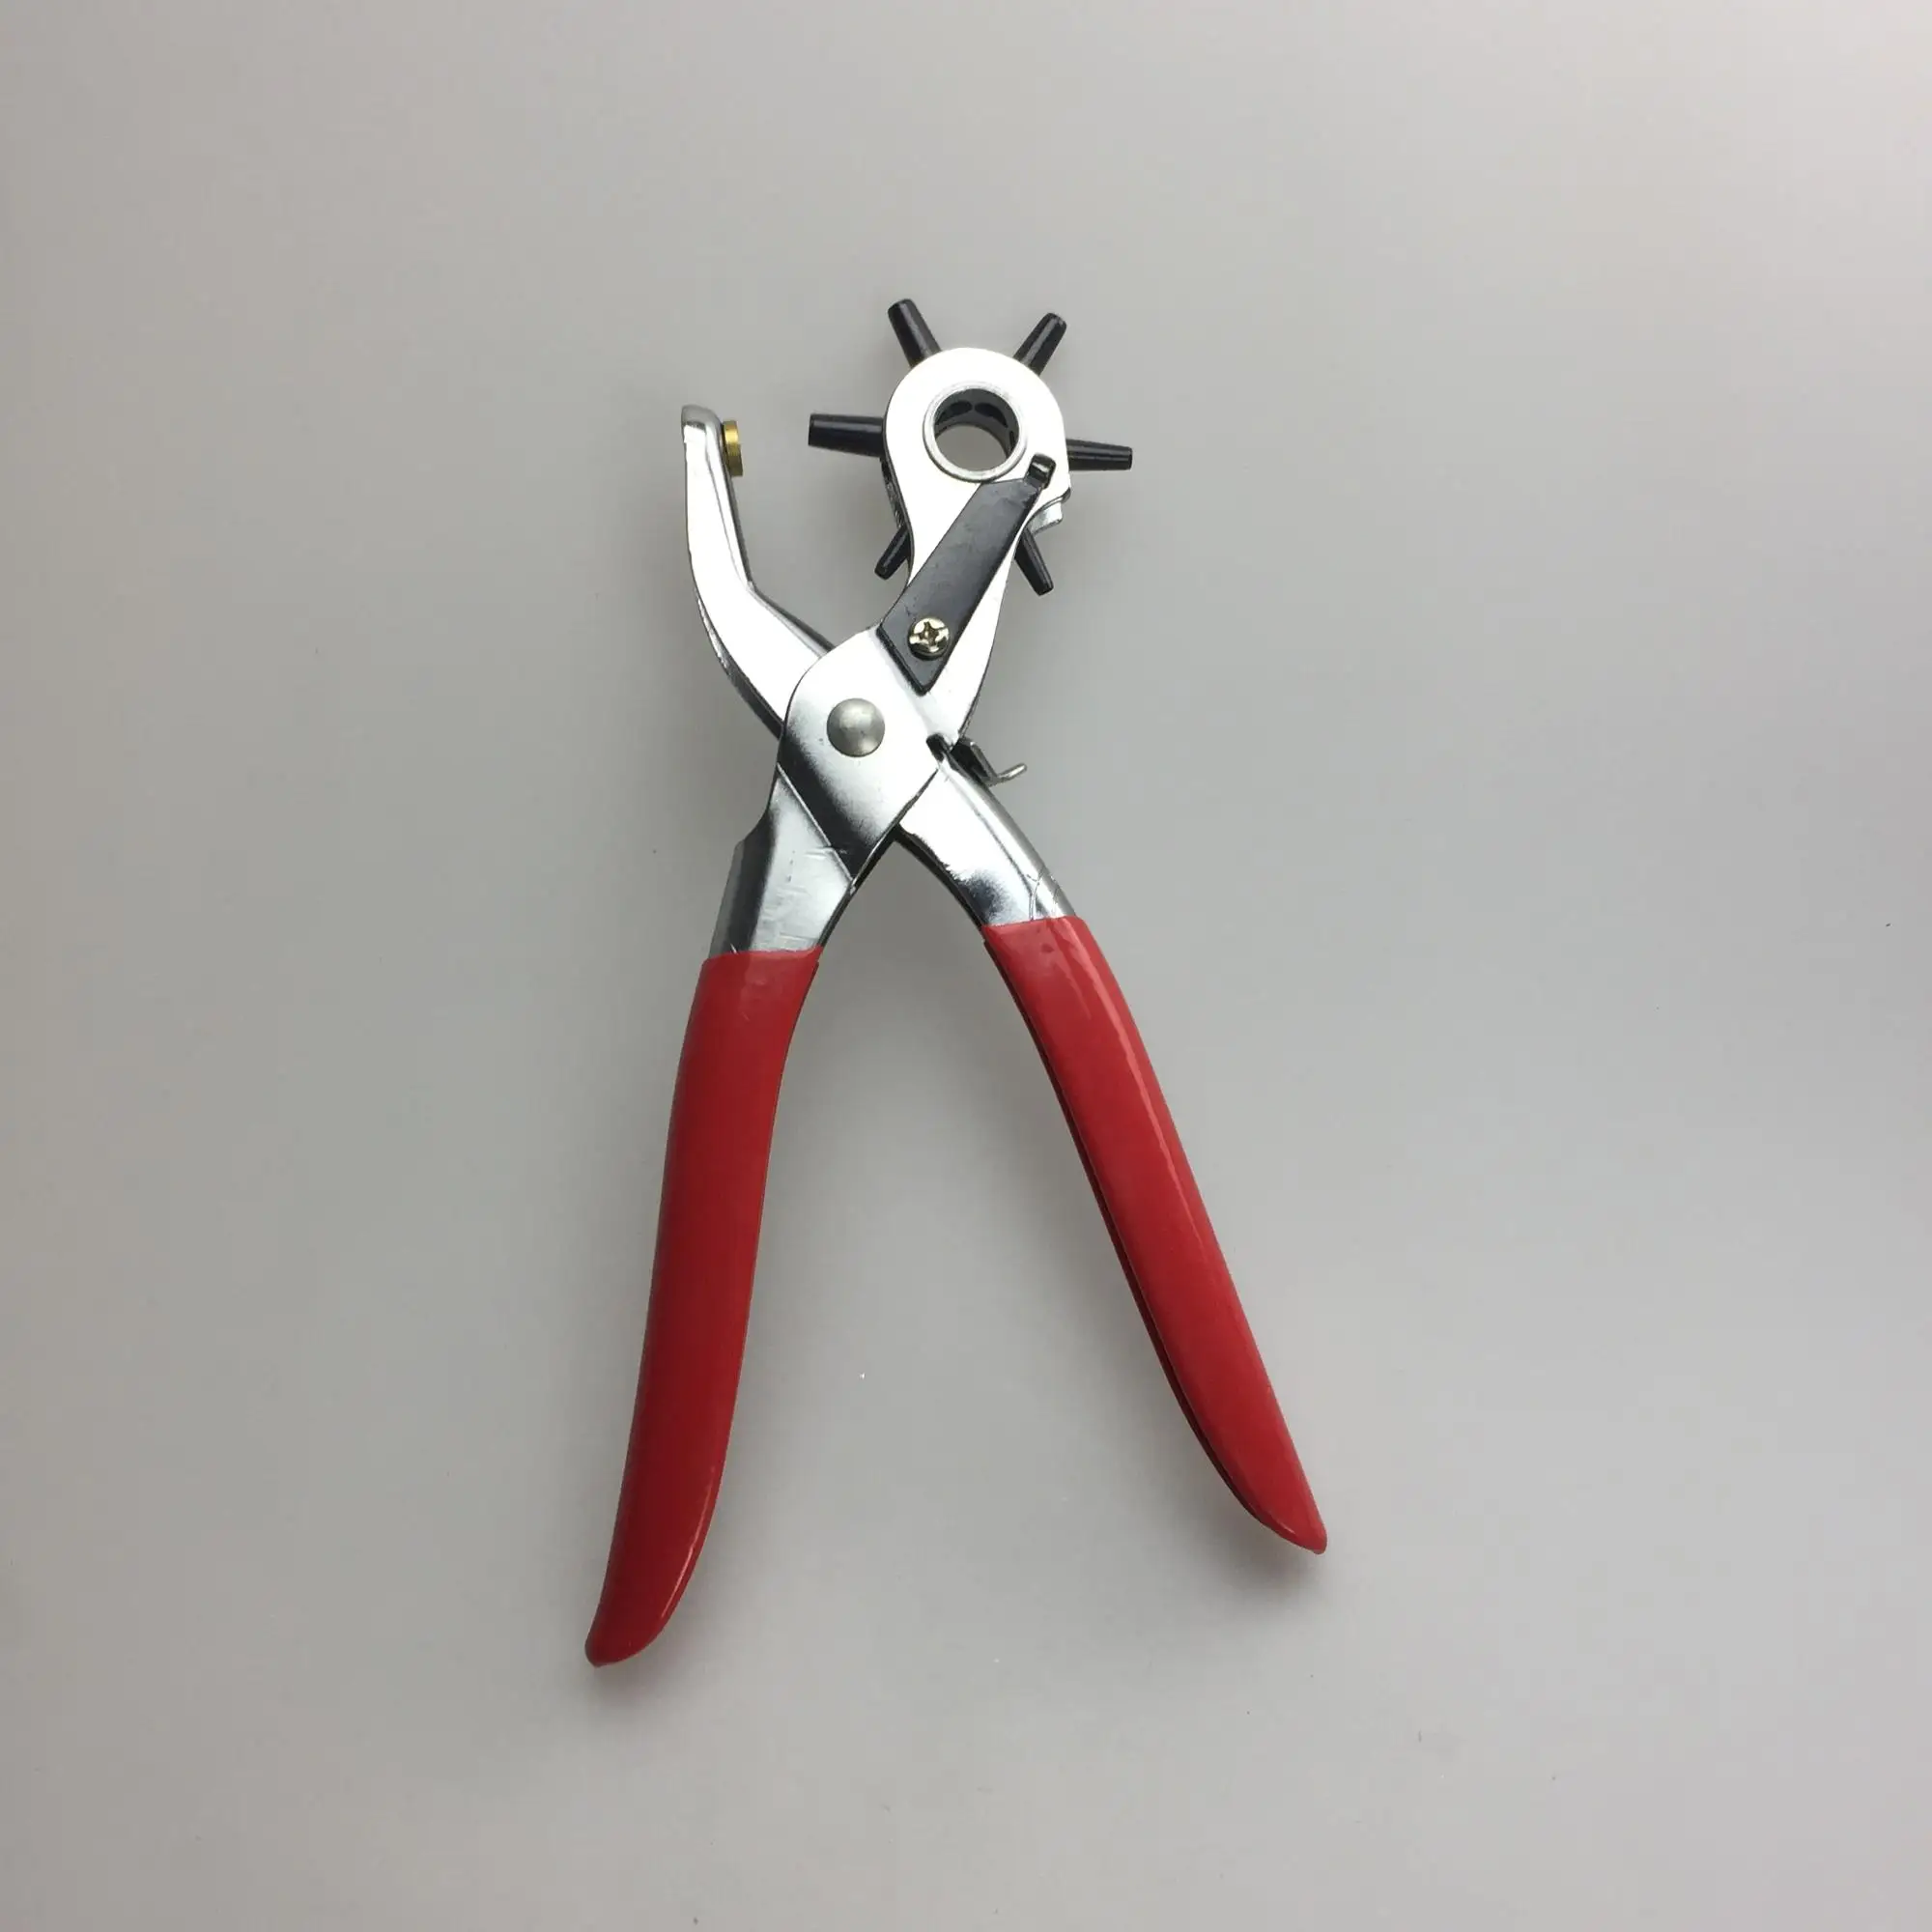 Metal Leather Set Revolving Hole Punch Pliers - Buy Punch Plier,Hole ...